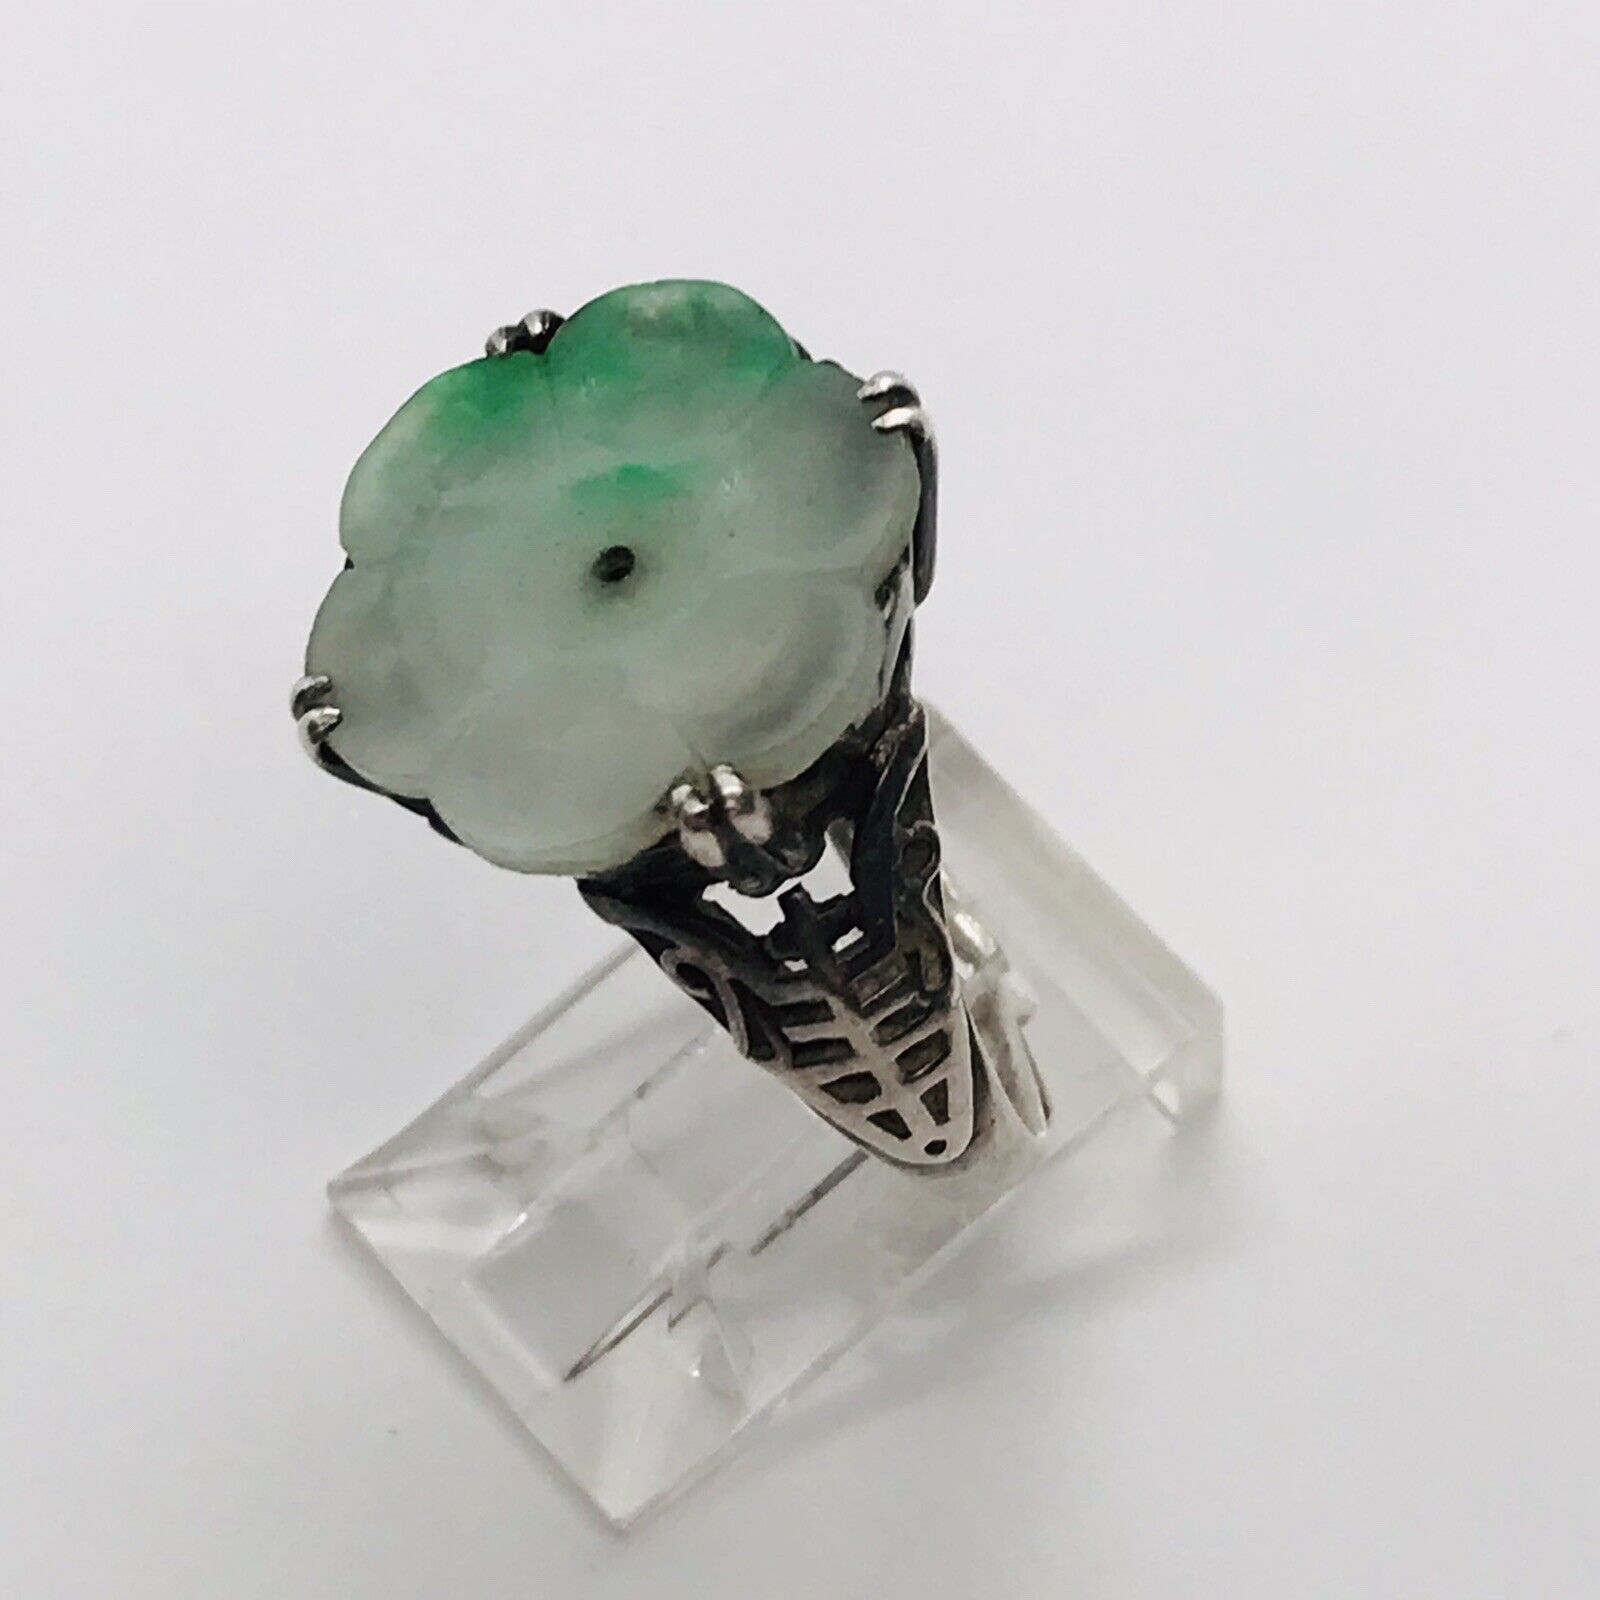 5.3g STERLING SILVER CHINESE EARLY JADE JADEITE IMPORT ANTIQUE RING SIZE 8 1920s